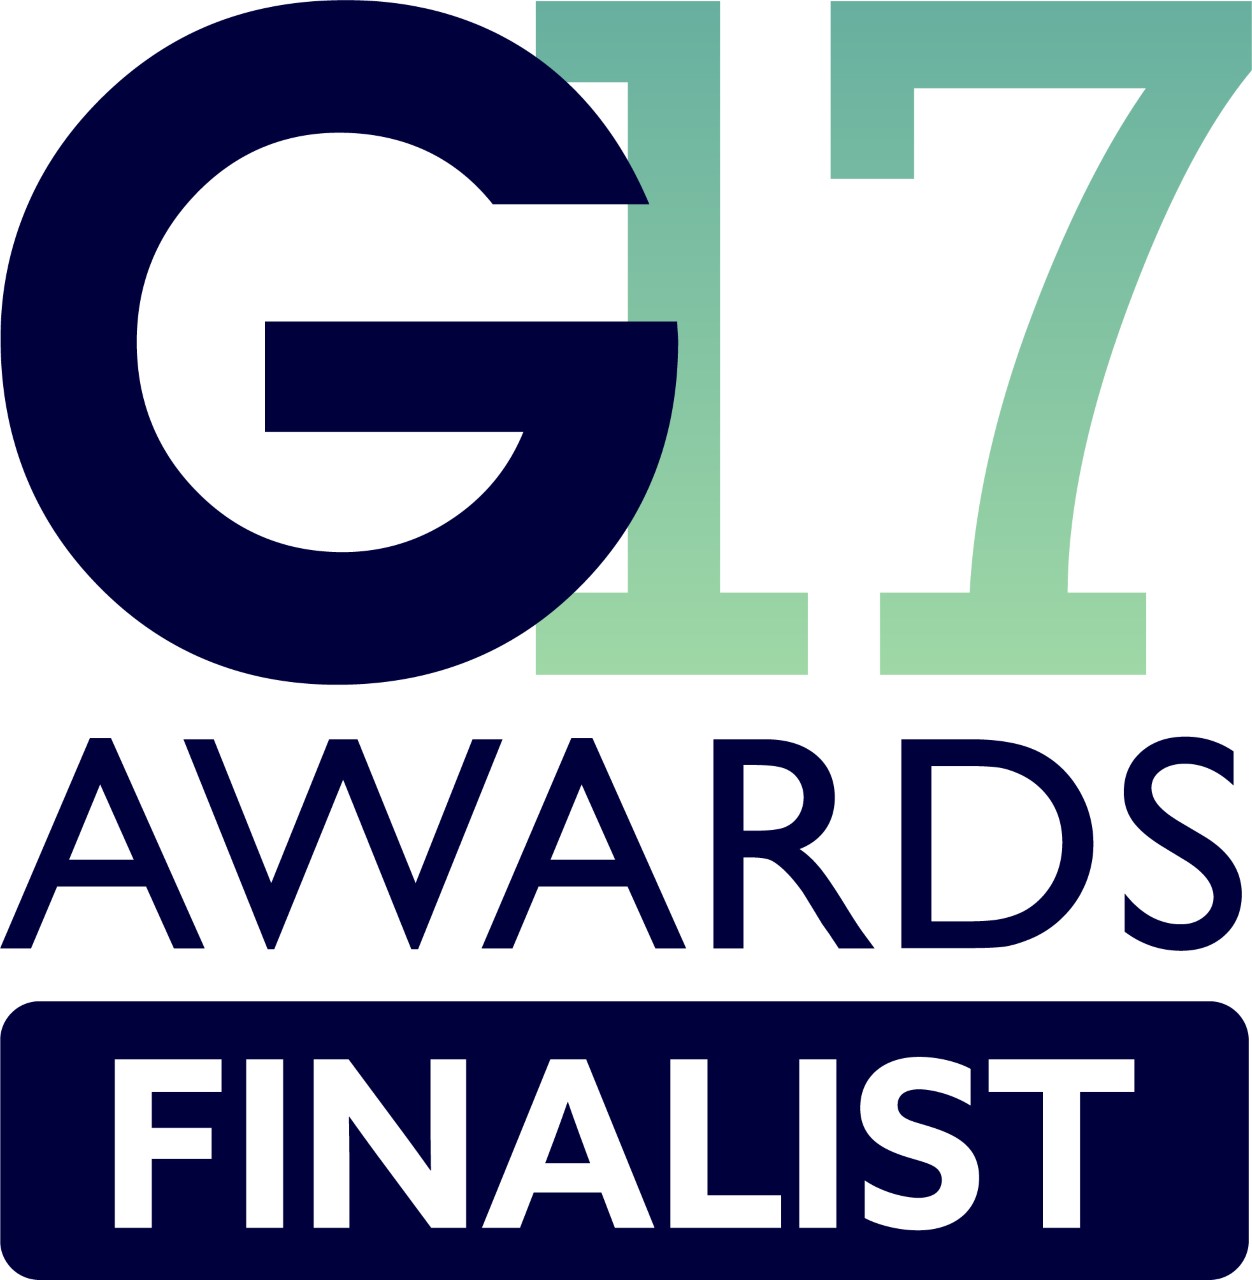 Epwin Window Systems shortlisted for three G Awards